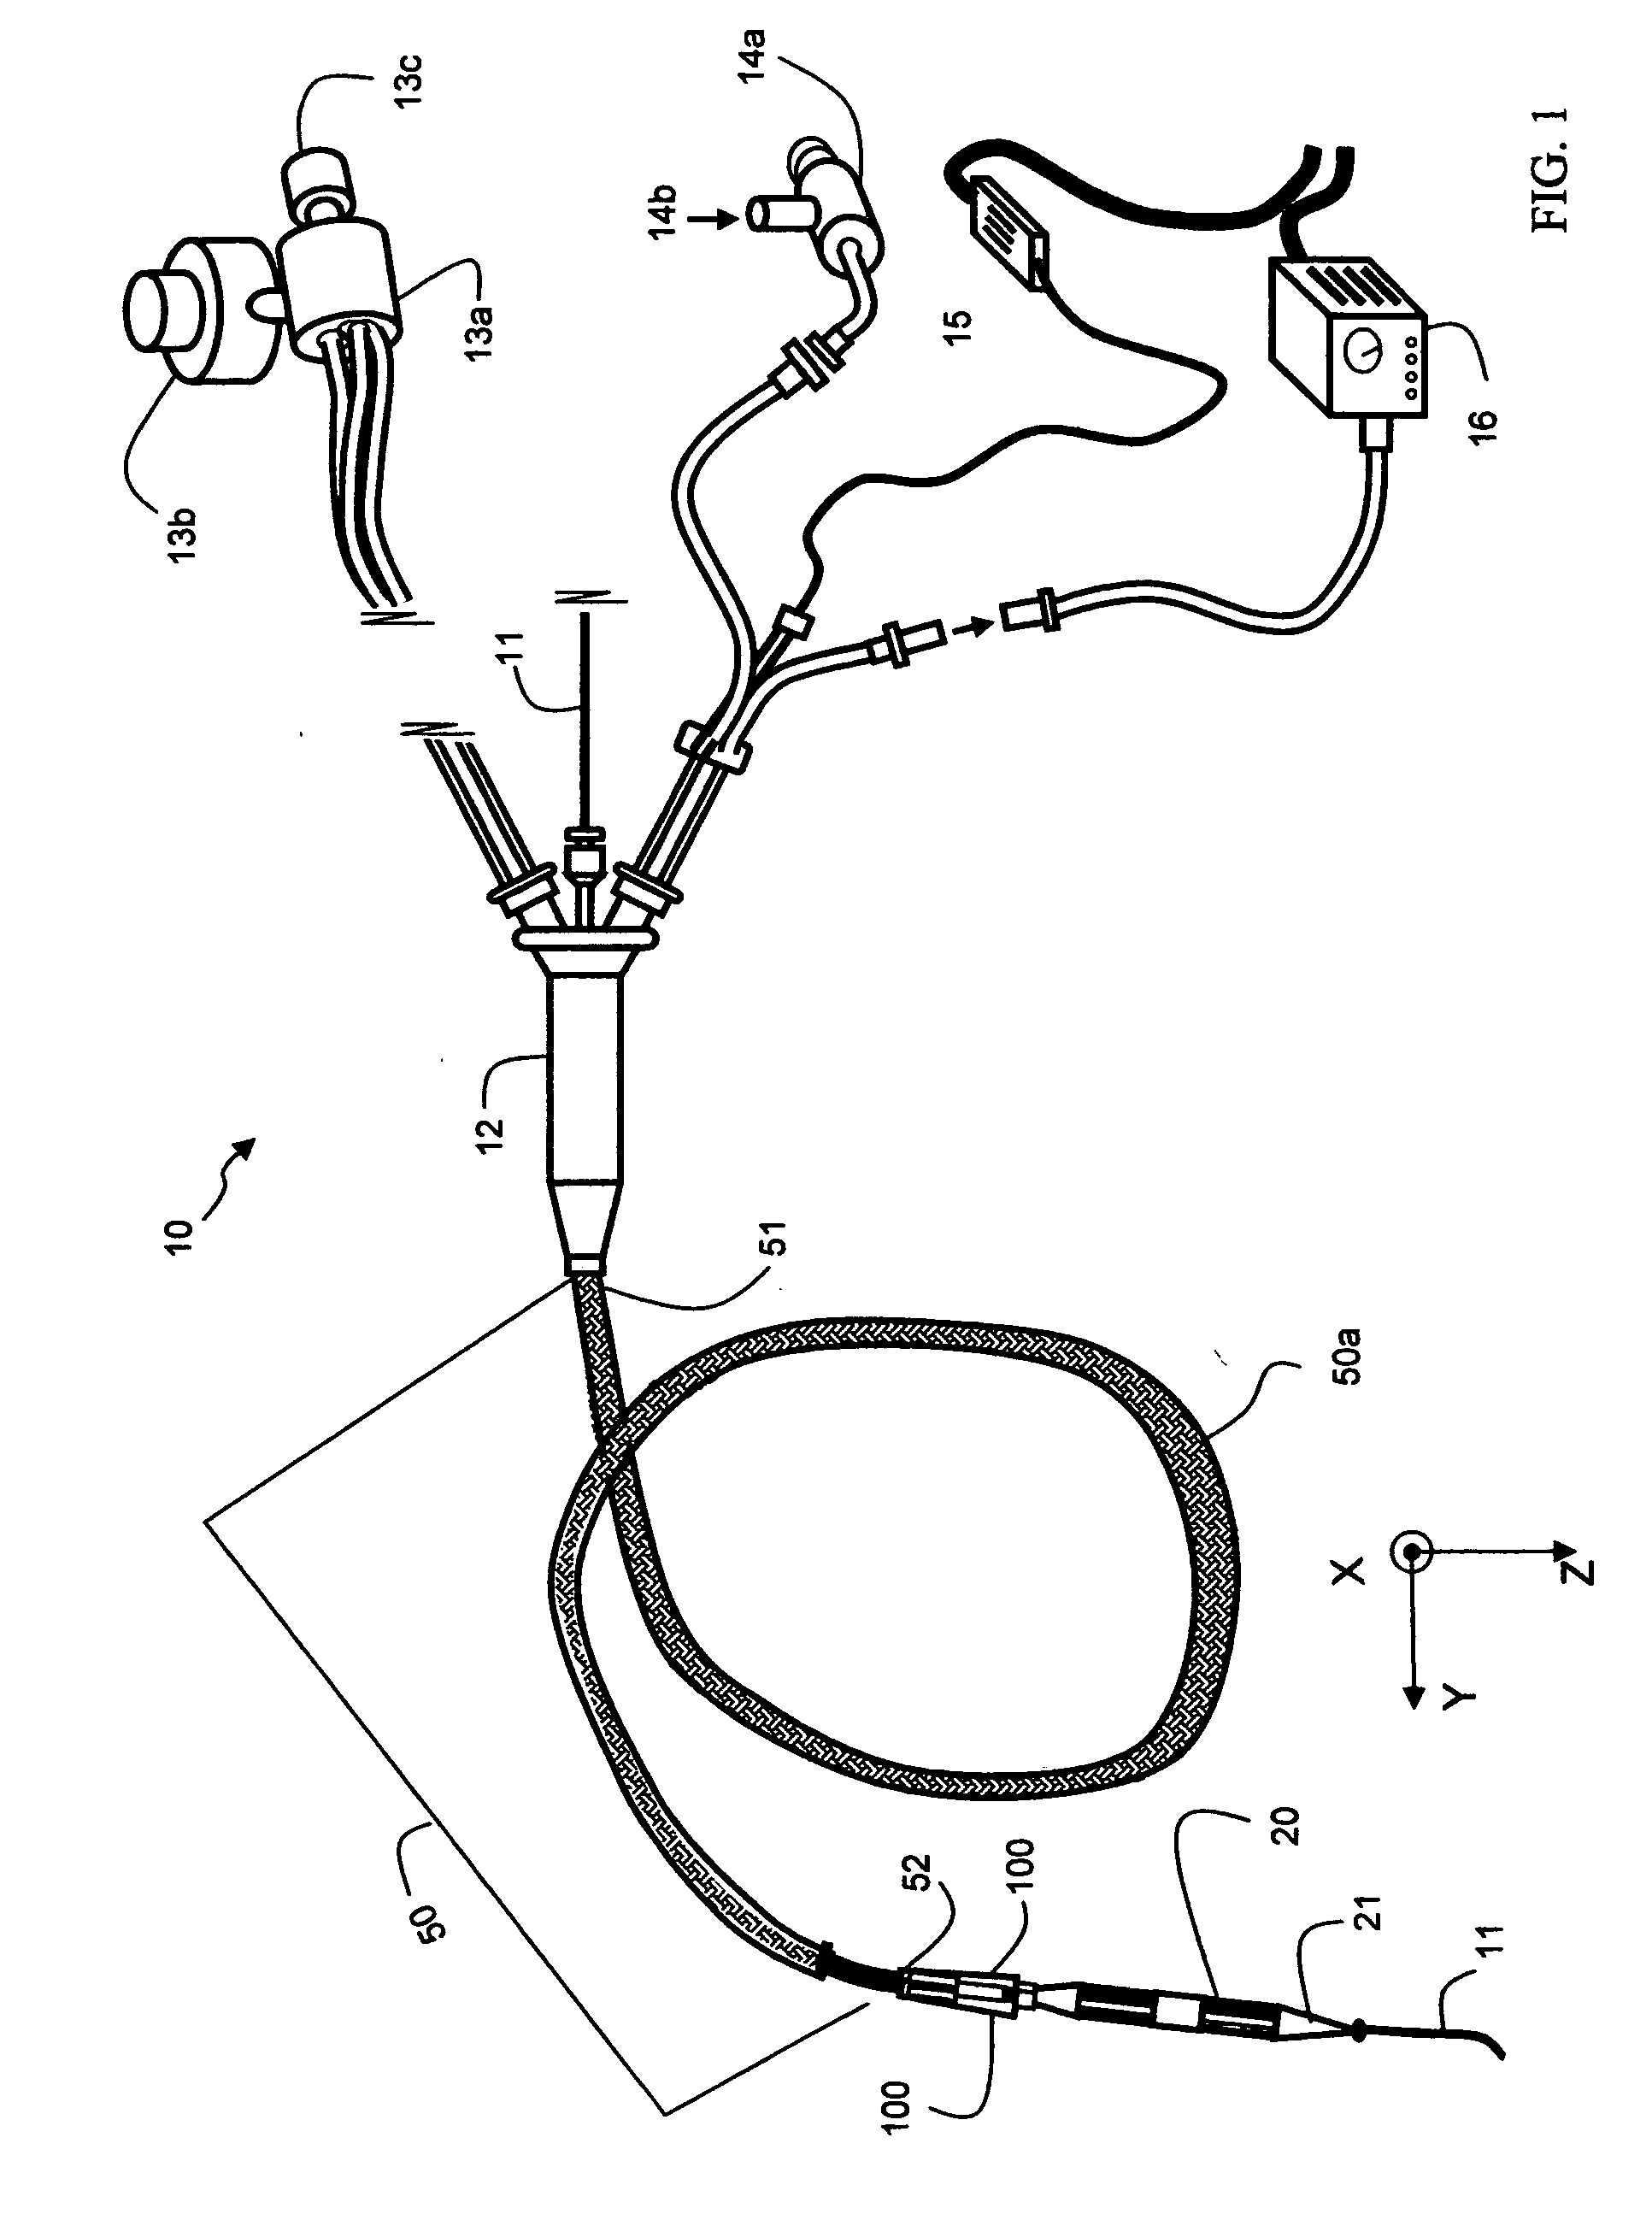 Intravascular ultrasound catheter device and method for ablating atheroma